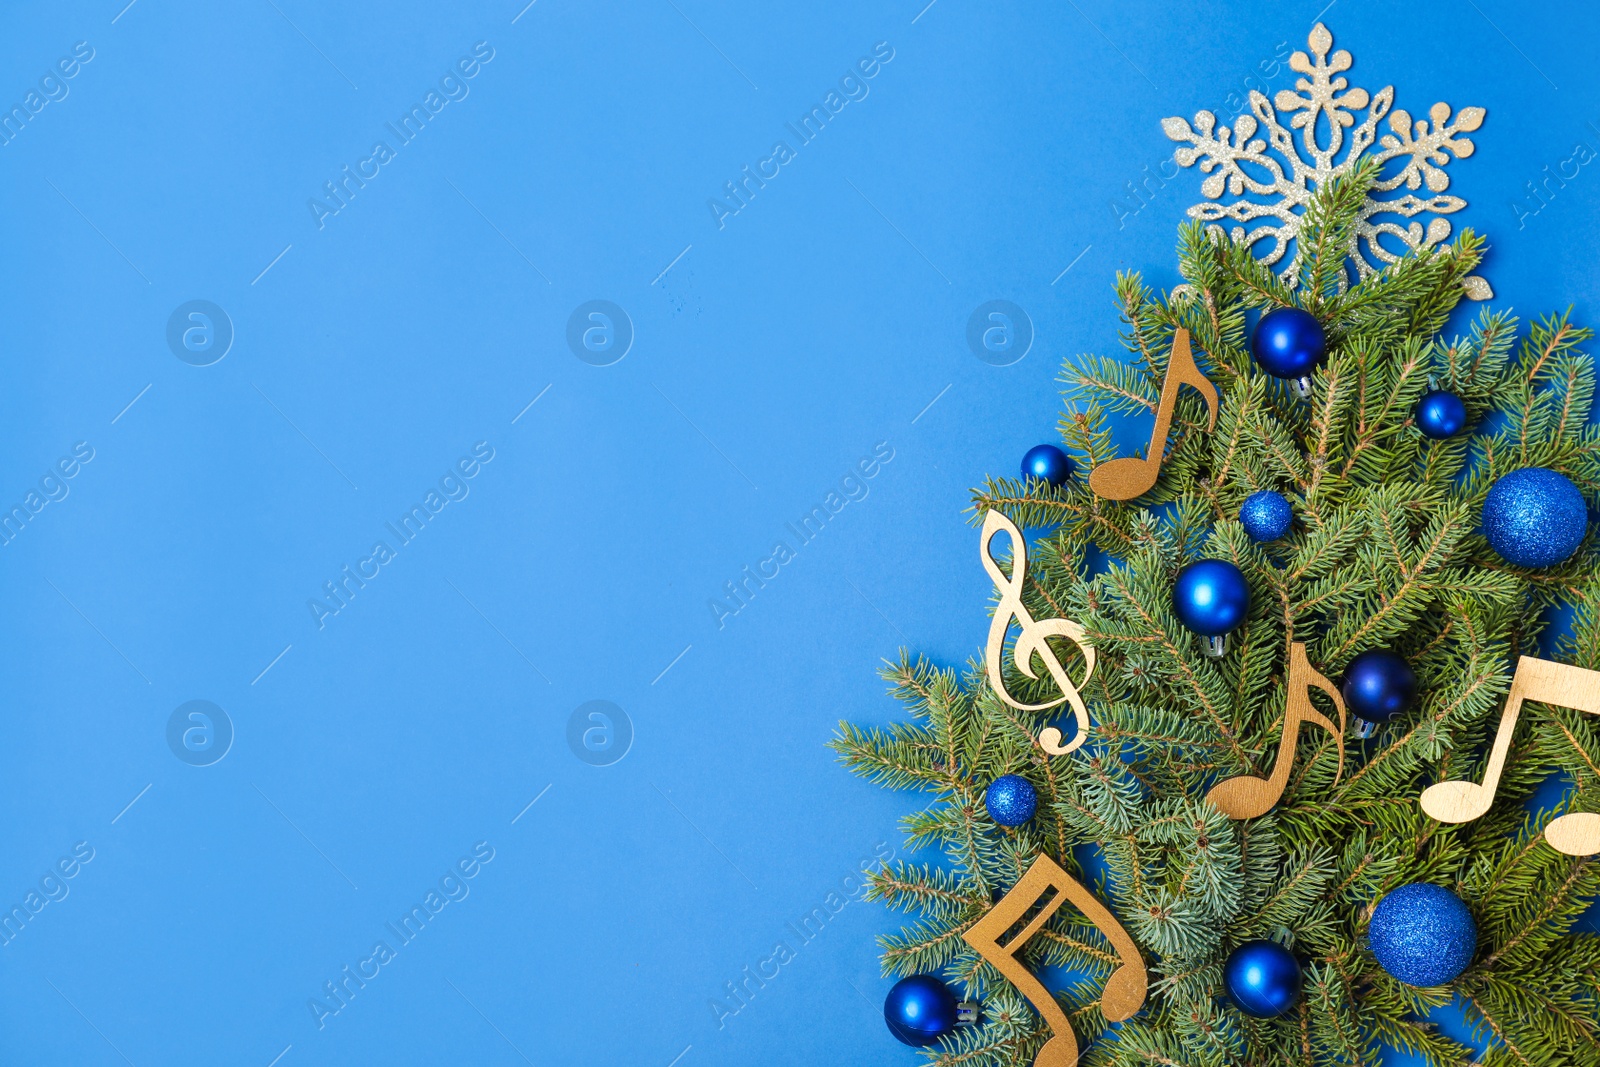 Photo of Flat lay composition with fir tree, Christmas decor and wooden music notes on color background. Space for text